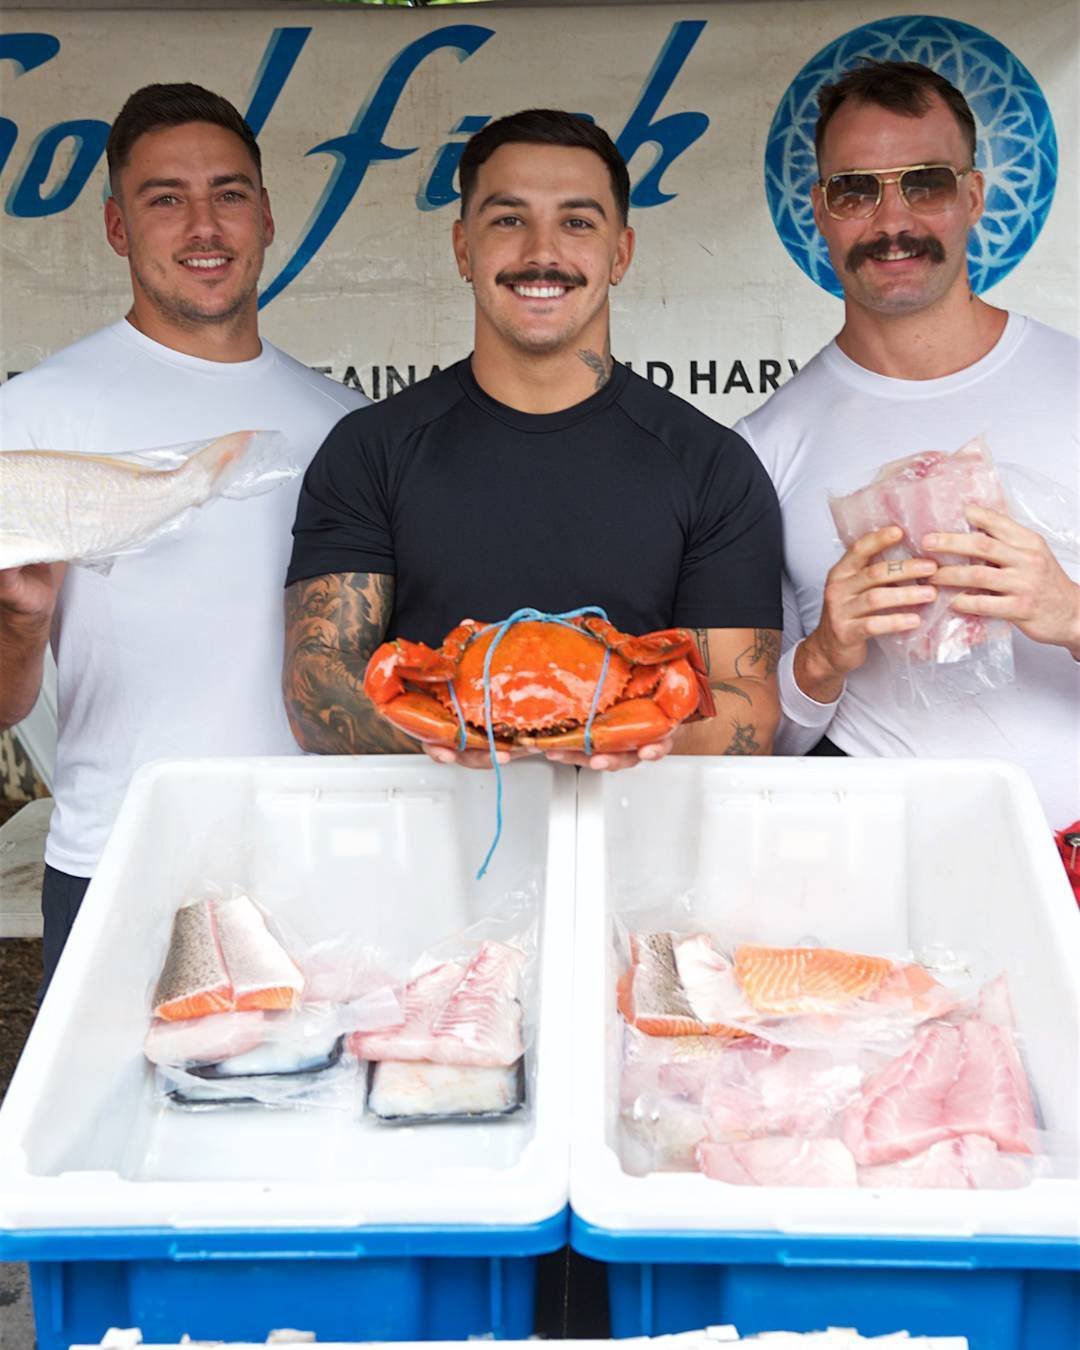 The Powerhouse Farmers Market is open and it's a beautiful morning! 🐓Come and say hi to our wonderful stallholders and see what's the latest catch today. Looking good Soulfish! 🦀